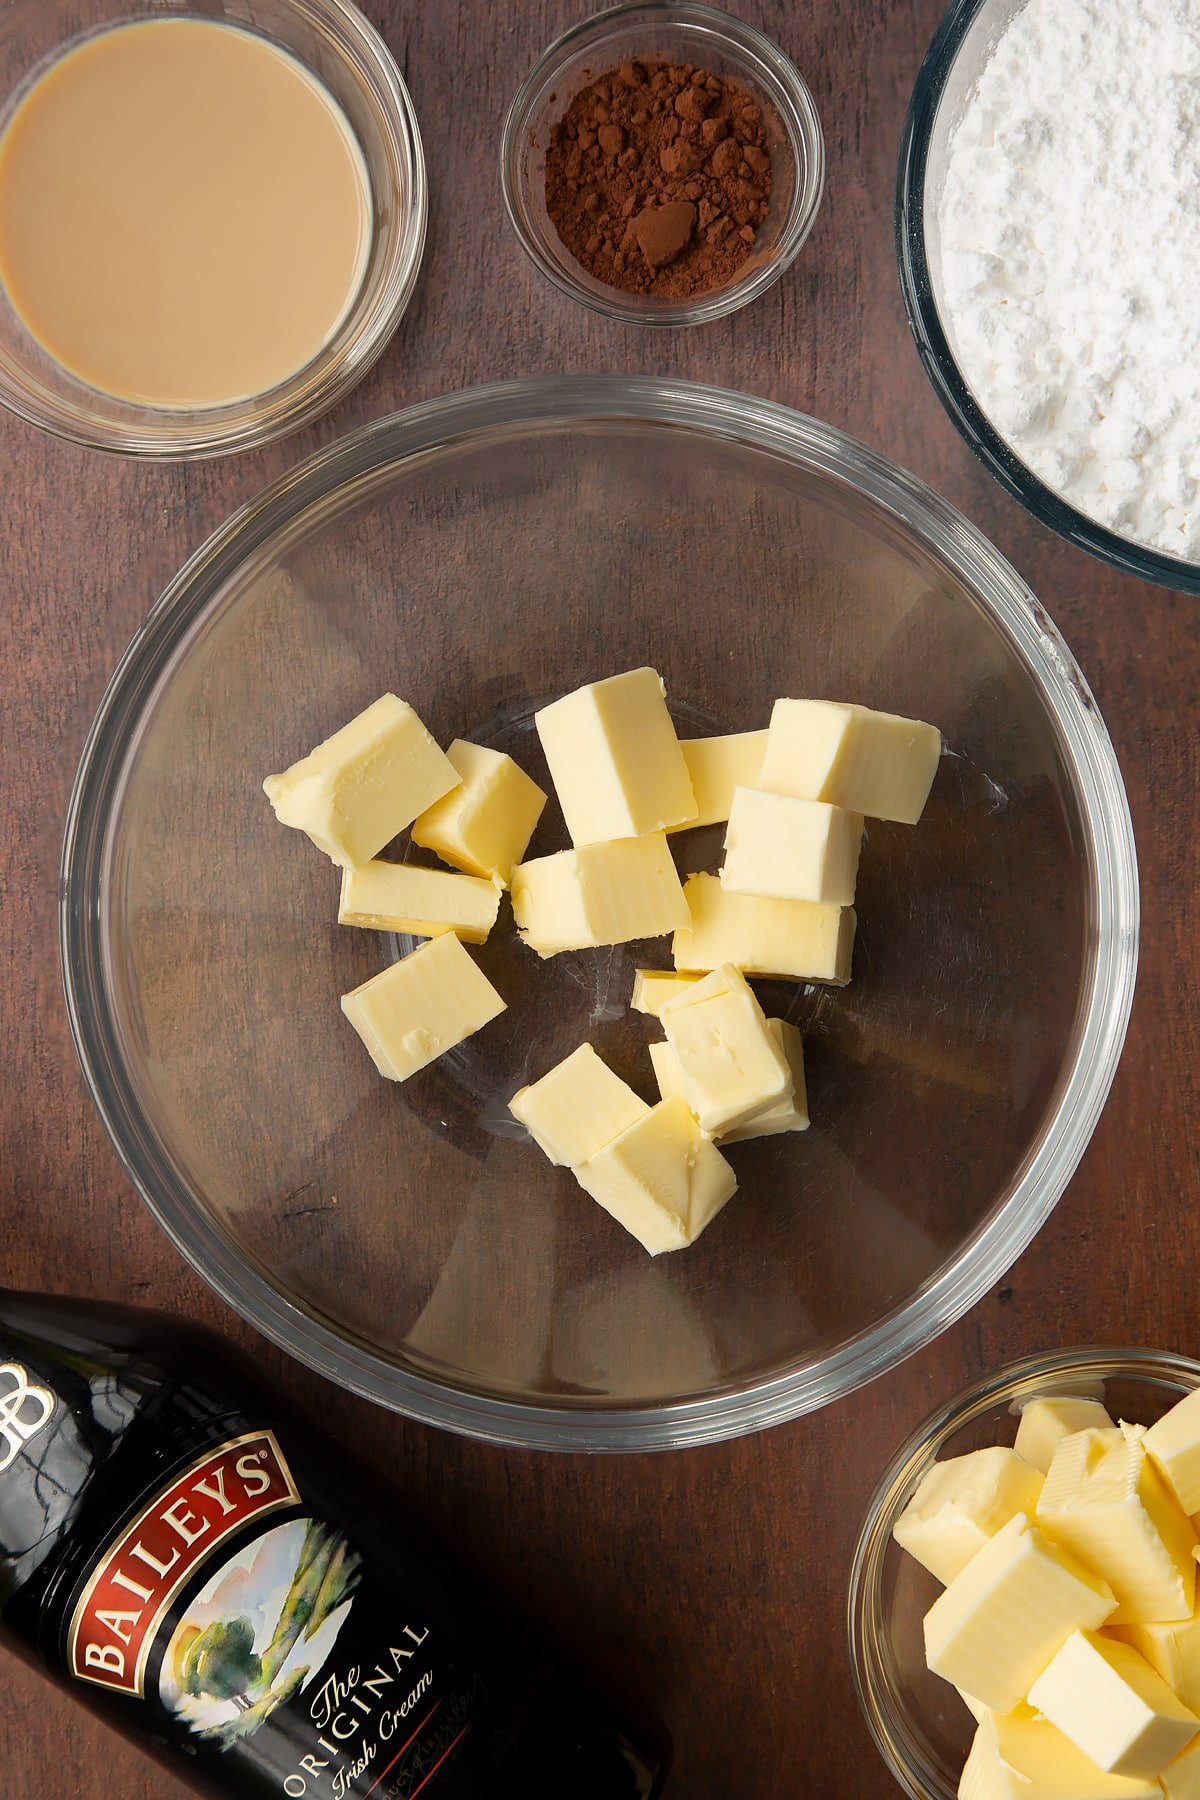 Cubed butter in a glass mixing bowl. Ingredients to make Baileys chocolate cupcakes surround the bowl.